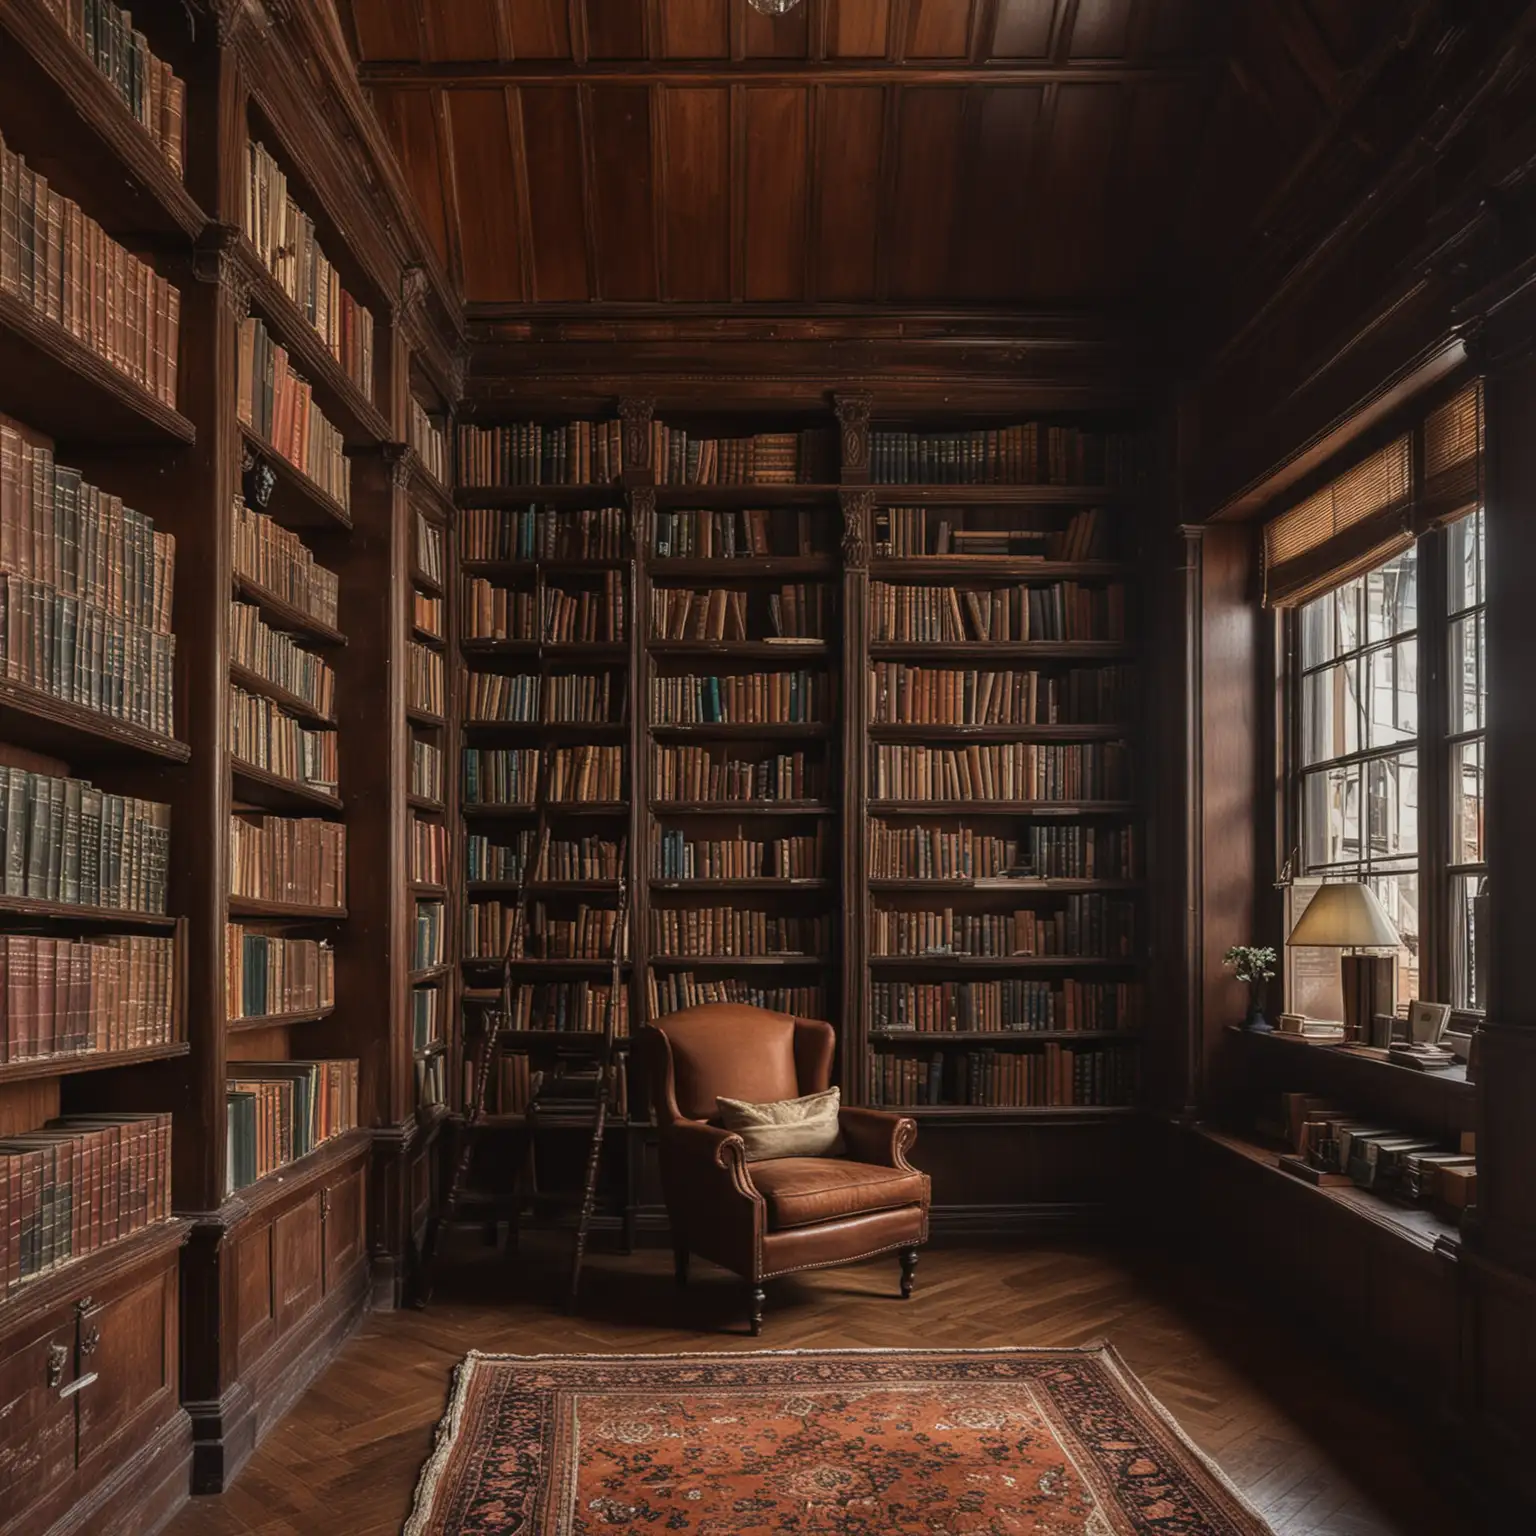 Cozy Corner Nook in an Antique Library with Dark Wood and Bookshelves